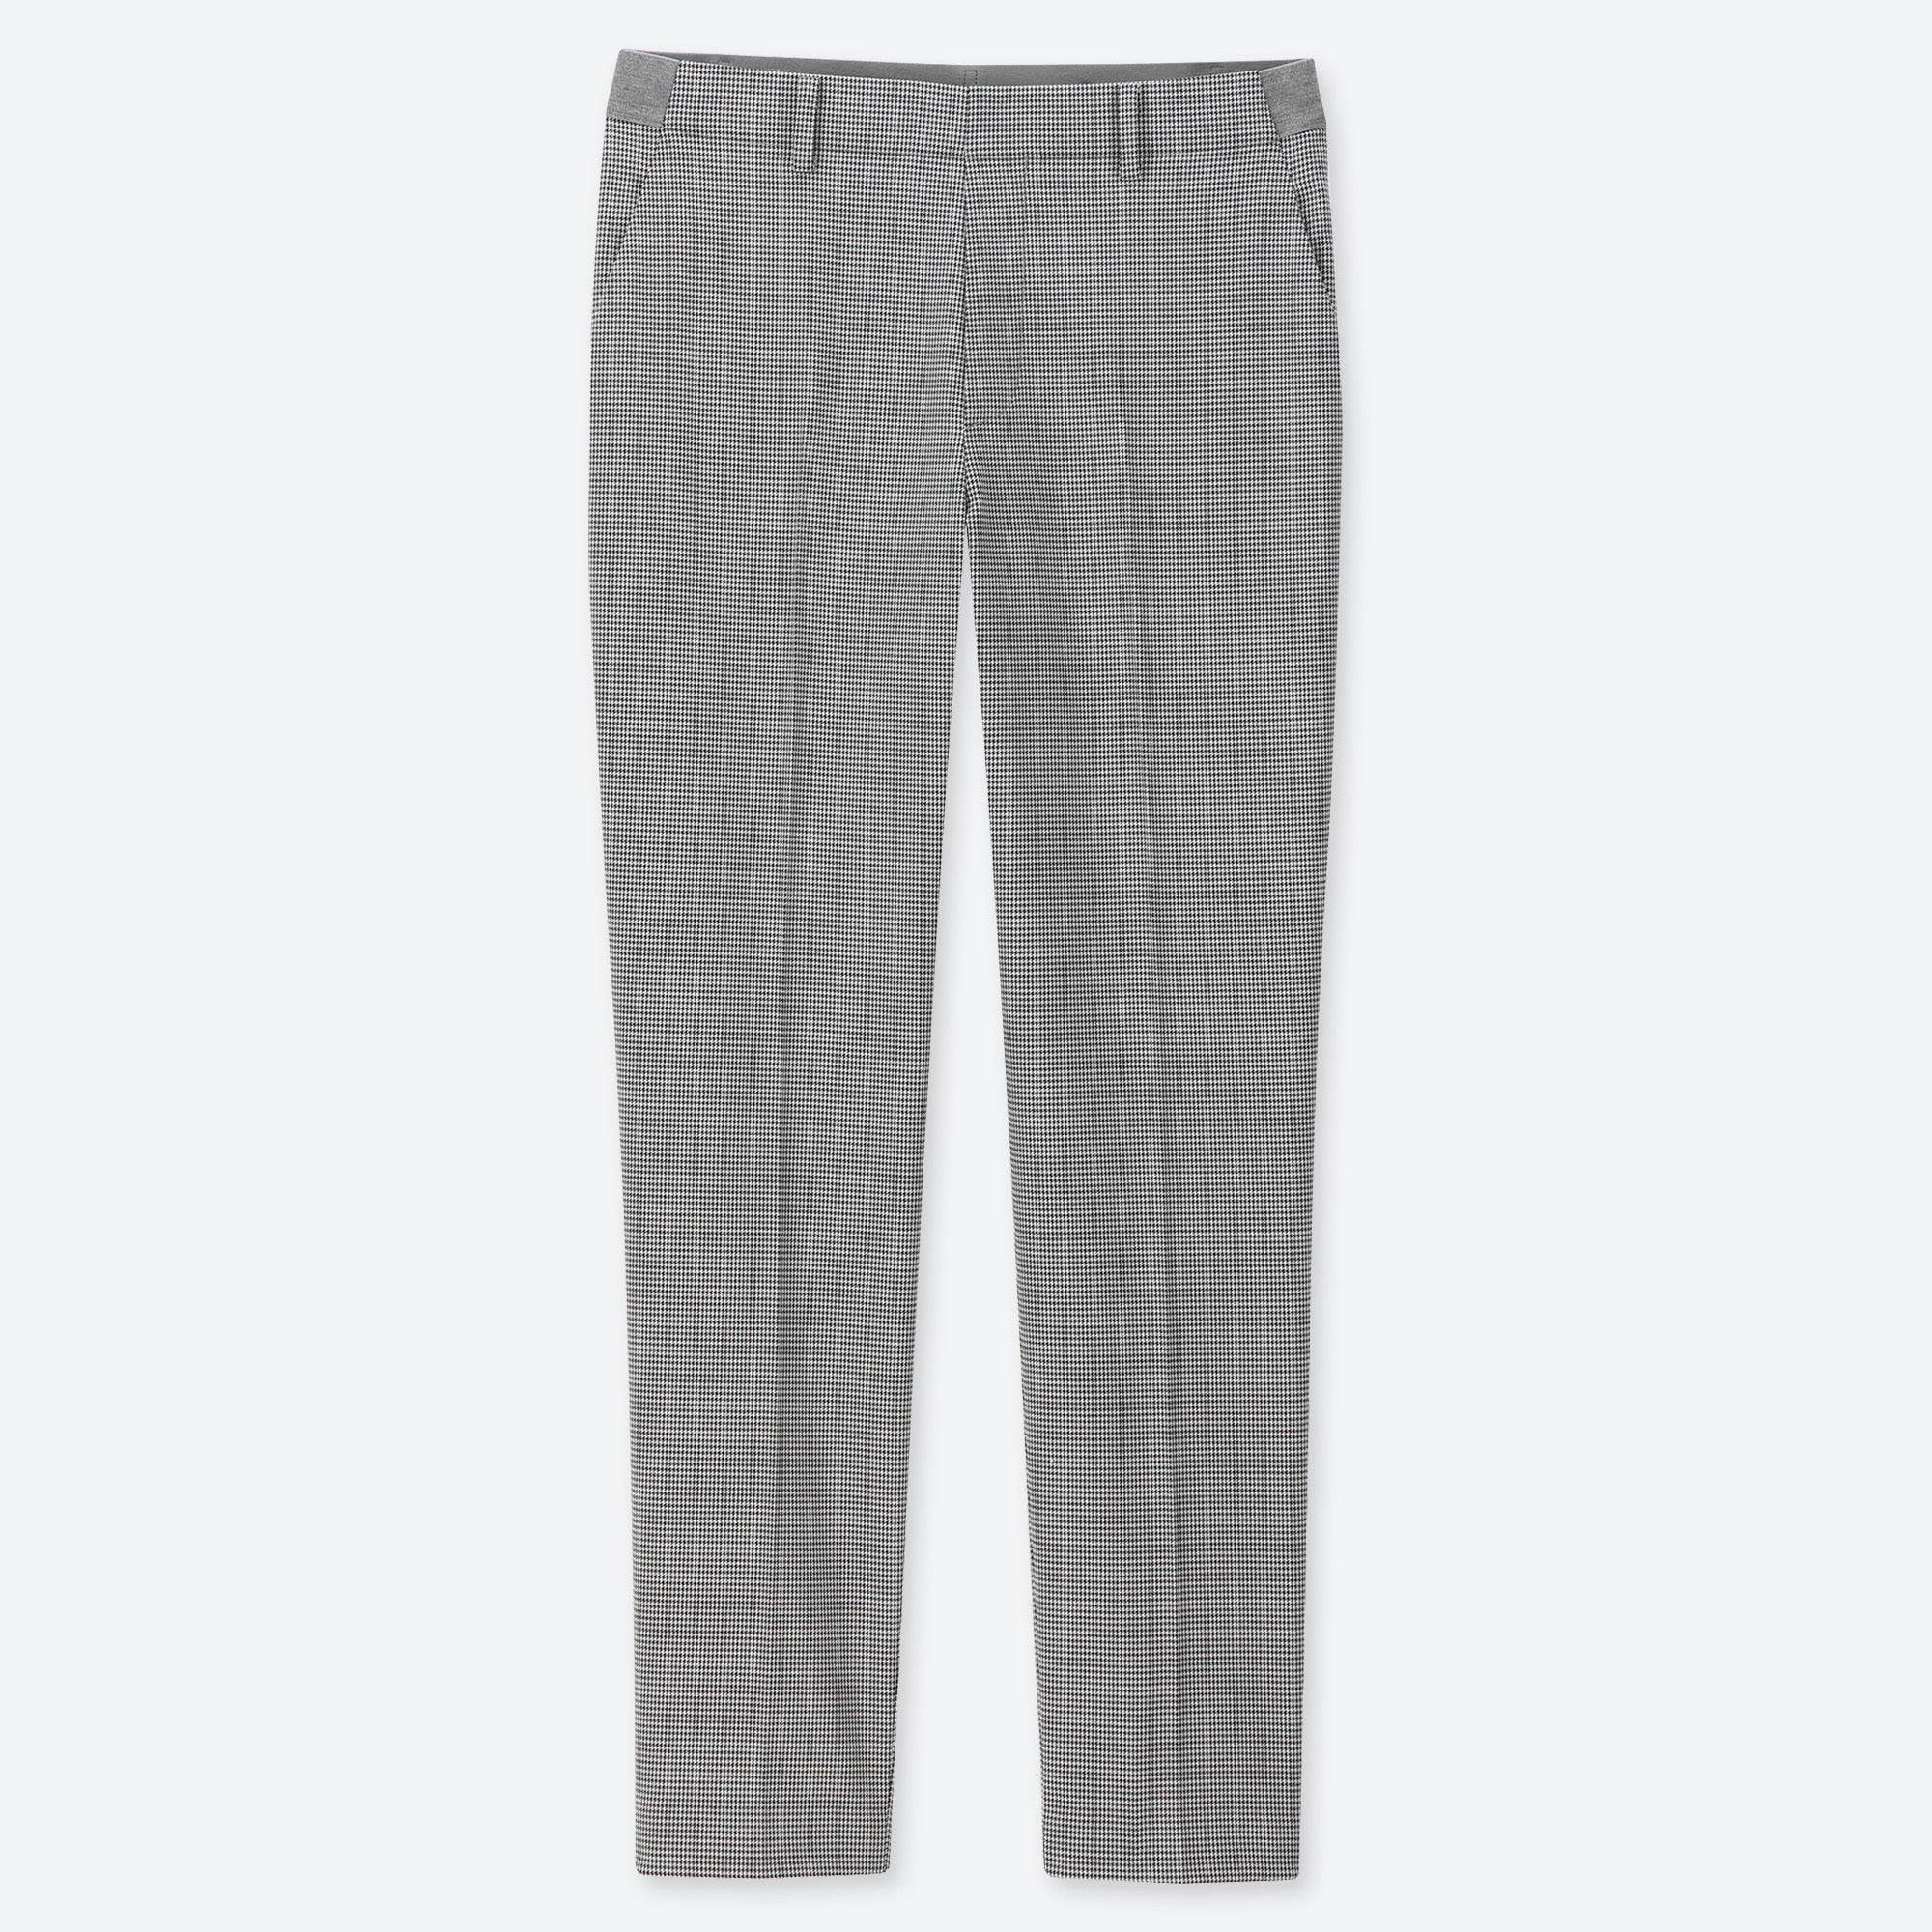 Houndstooth Pants from Uniqlo by Kelly in the City